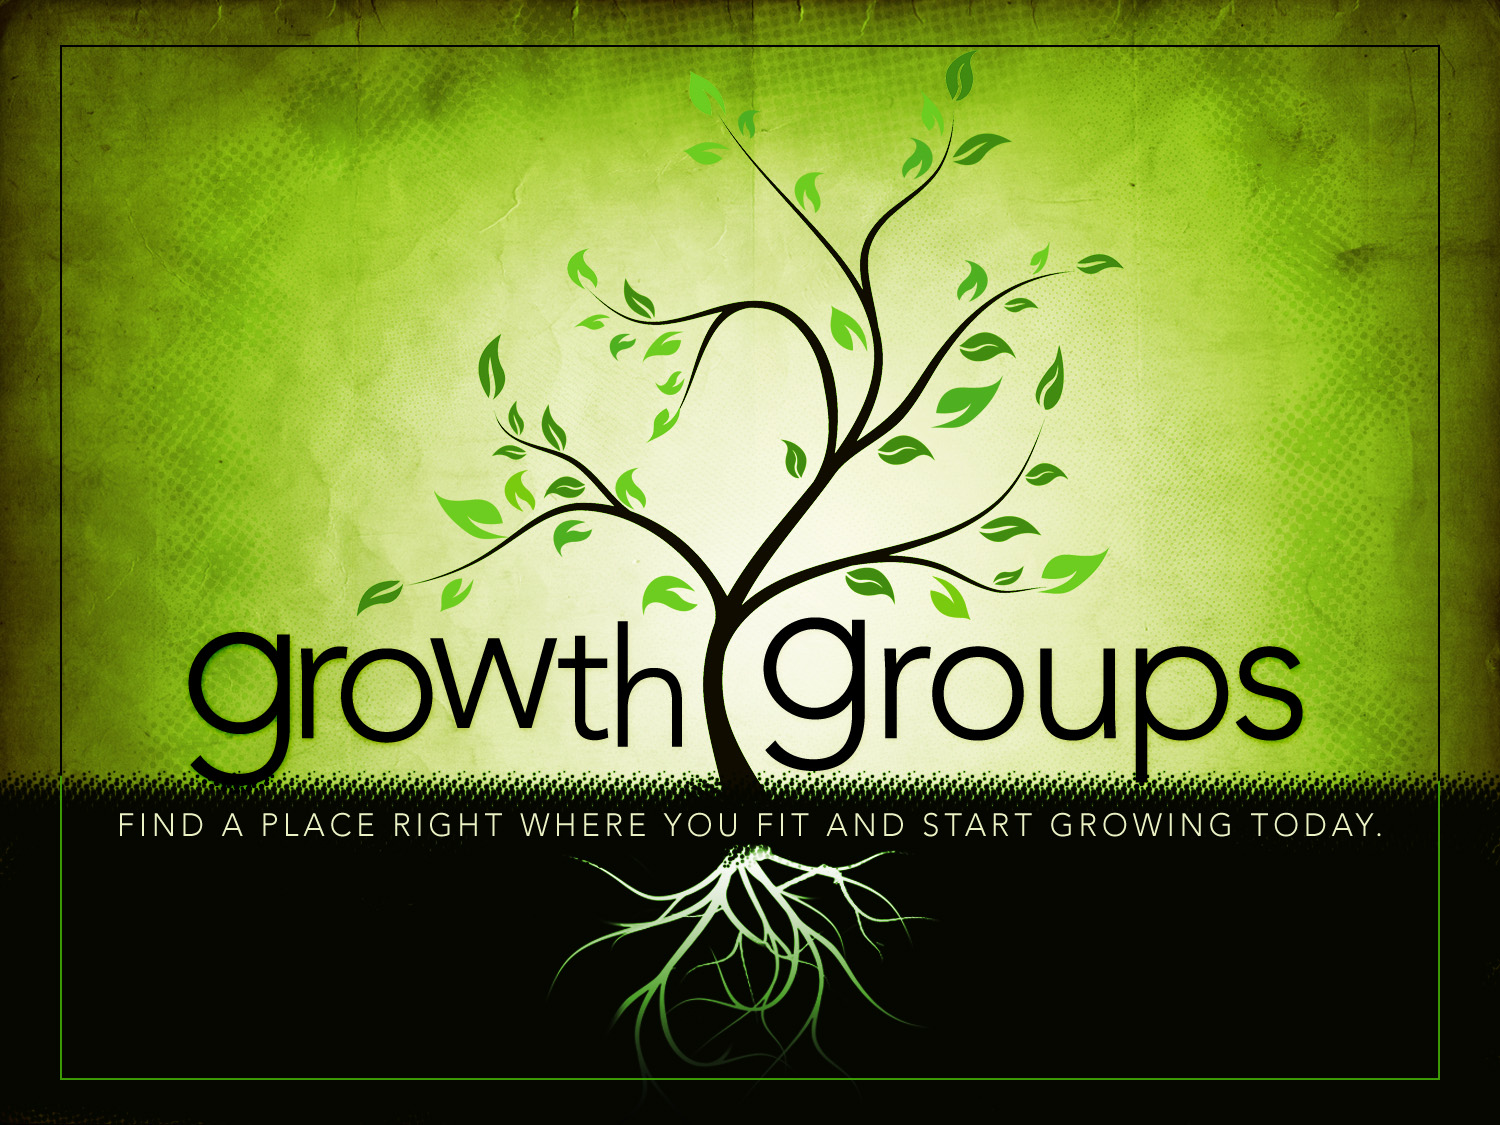 2017 Summer Growth Groups